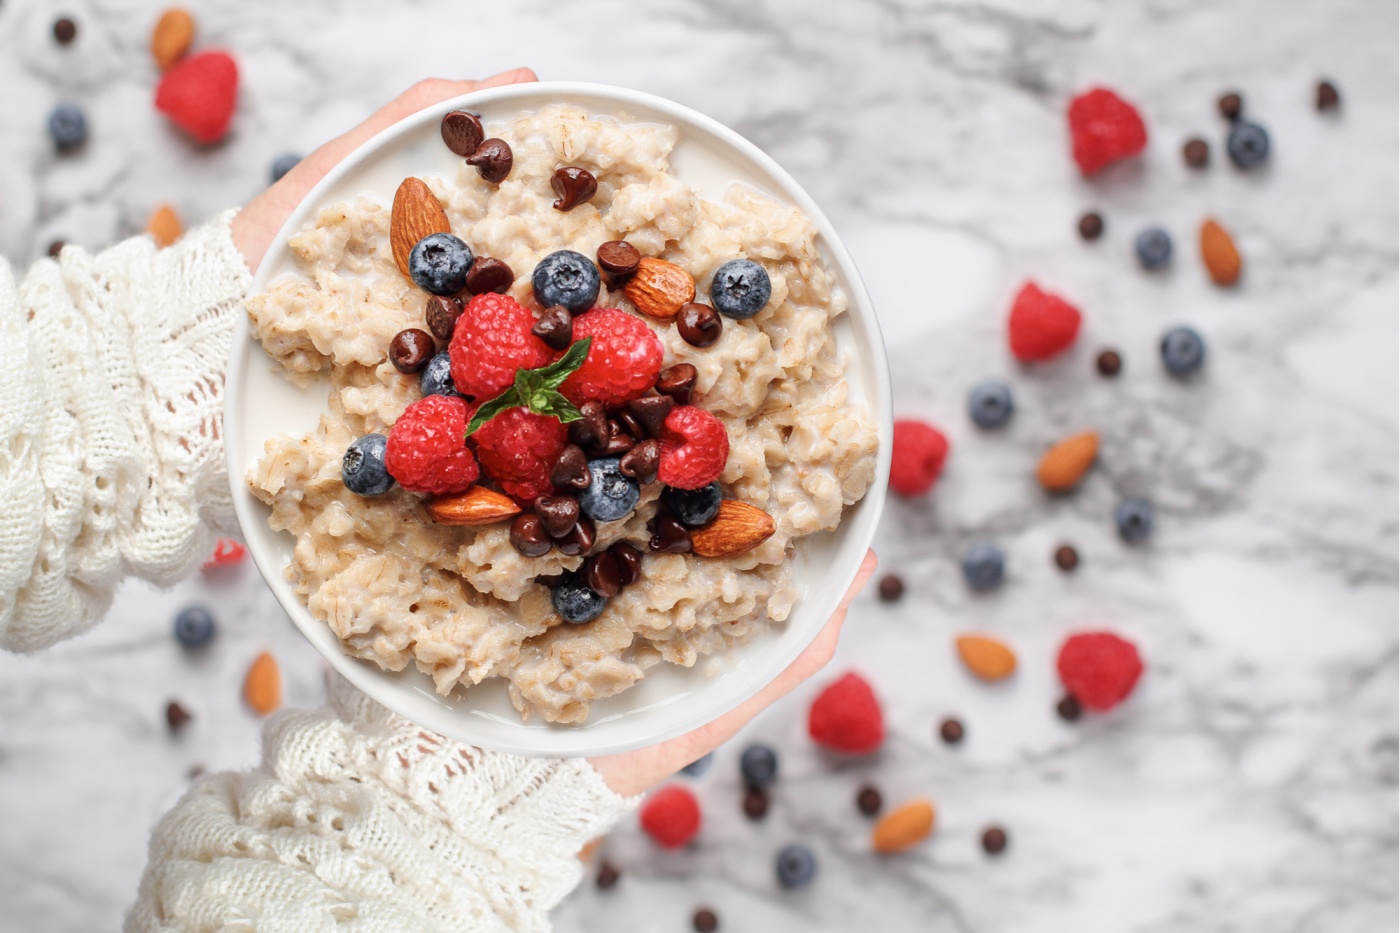 How to Mix Protein Powder Into Hot Oatmeal